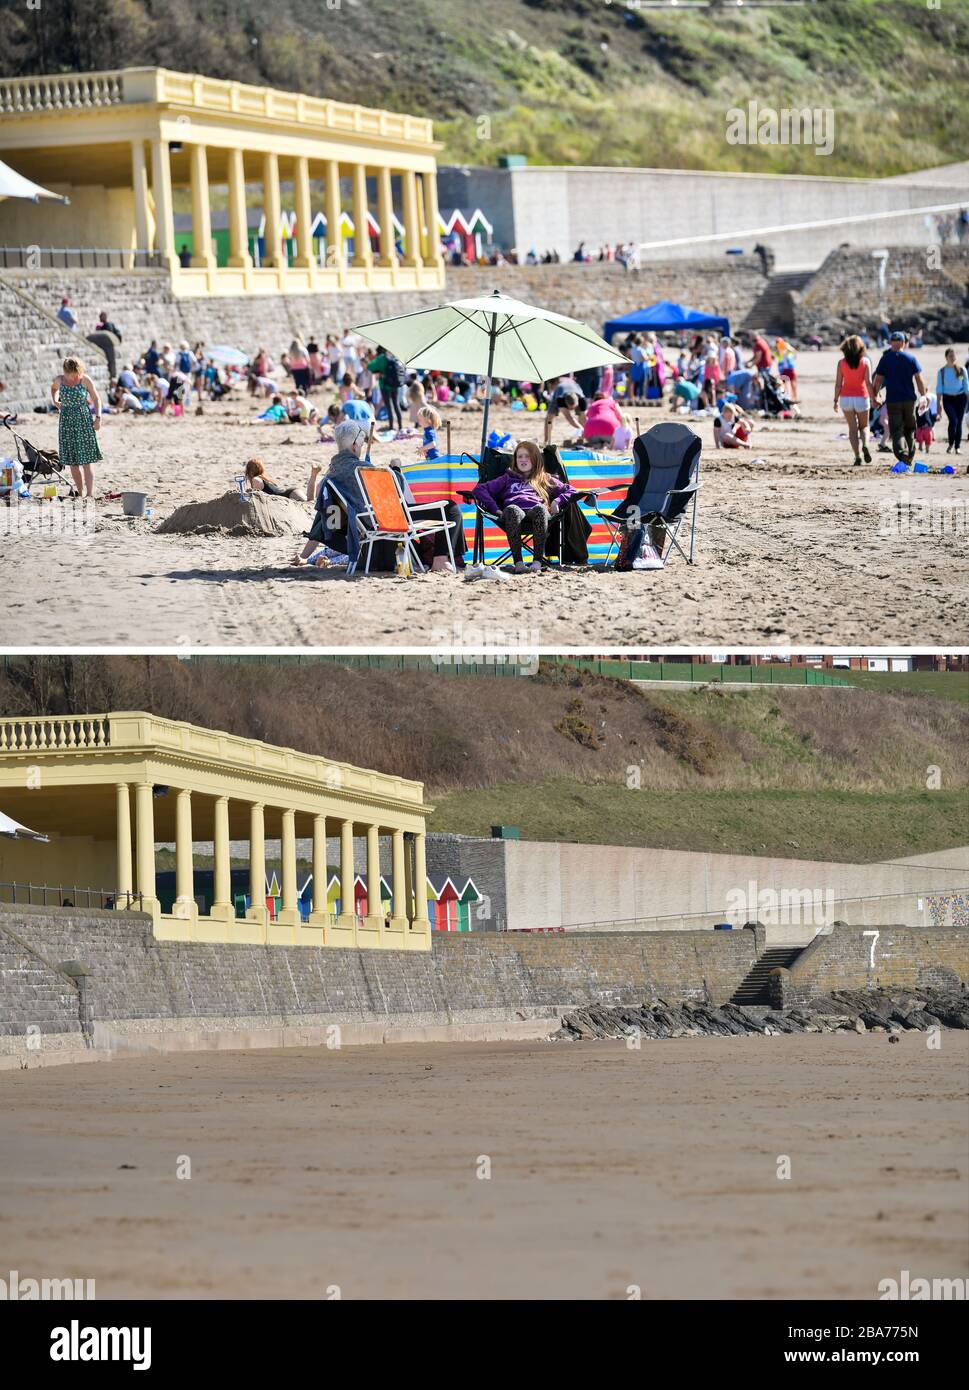 Composite photos of people on the beach at Barry Island, South Wales, on 14/09/19 (top), and on Wednesday 25/03/20 (bottom), after Prime Minister Boris Johnson put the UK in lockdown to help curb the spread of the coronavirus. Stock Photo